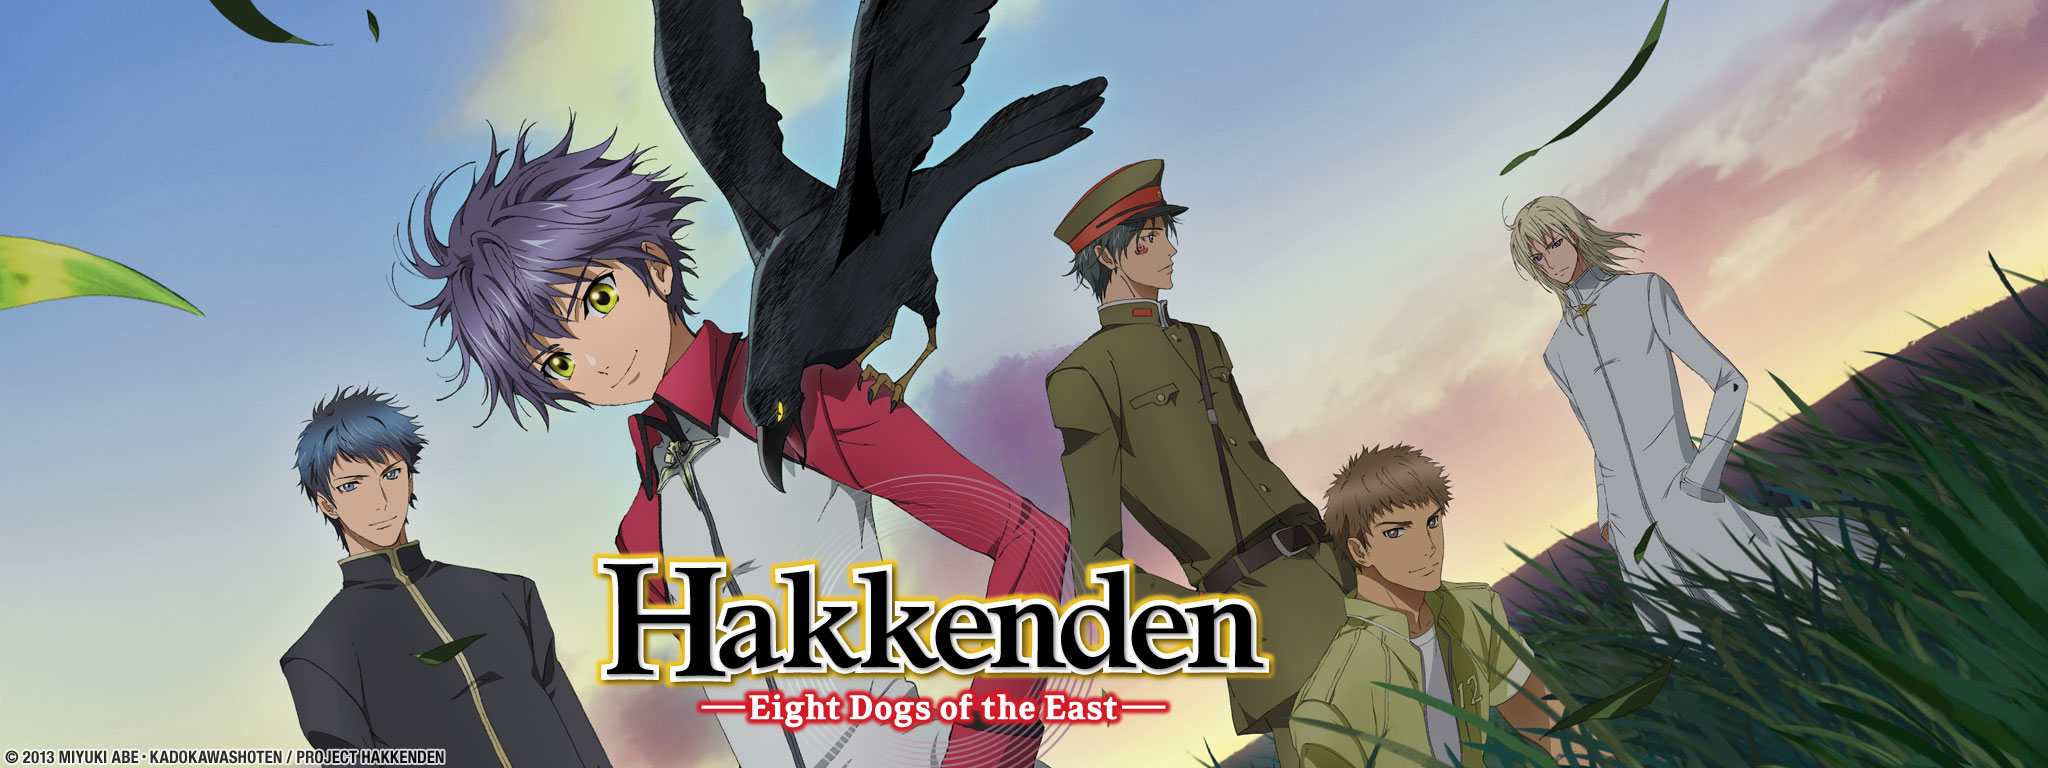 Title Art for Hakkenden: Eight Dogs of the East